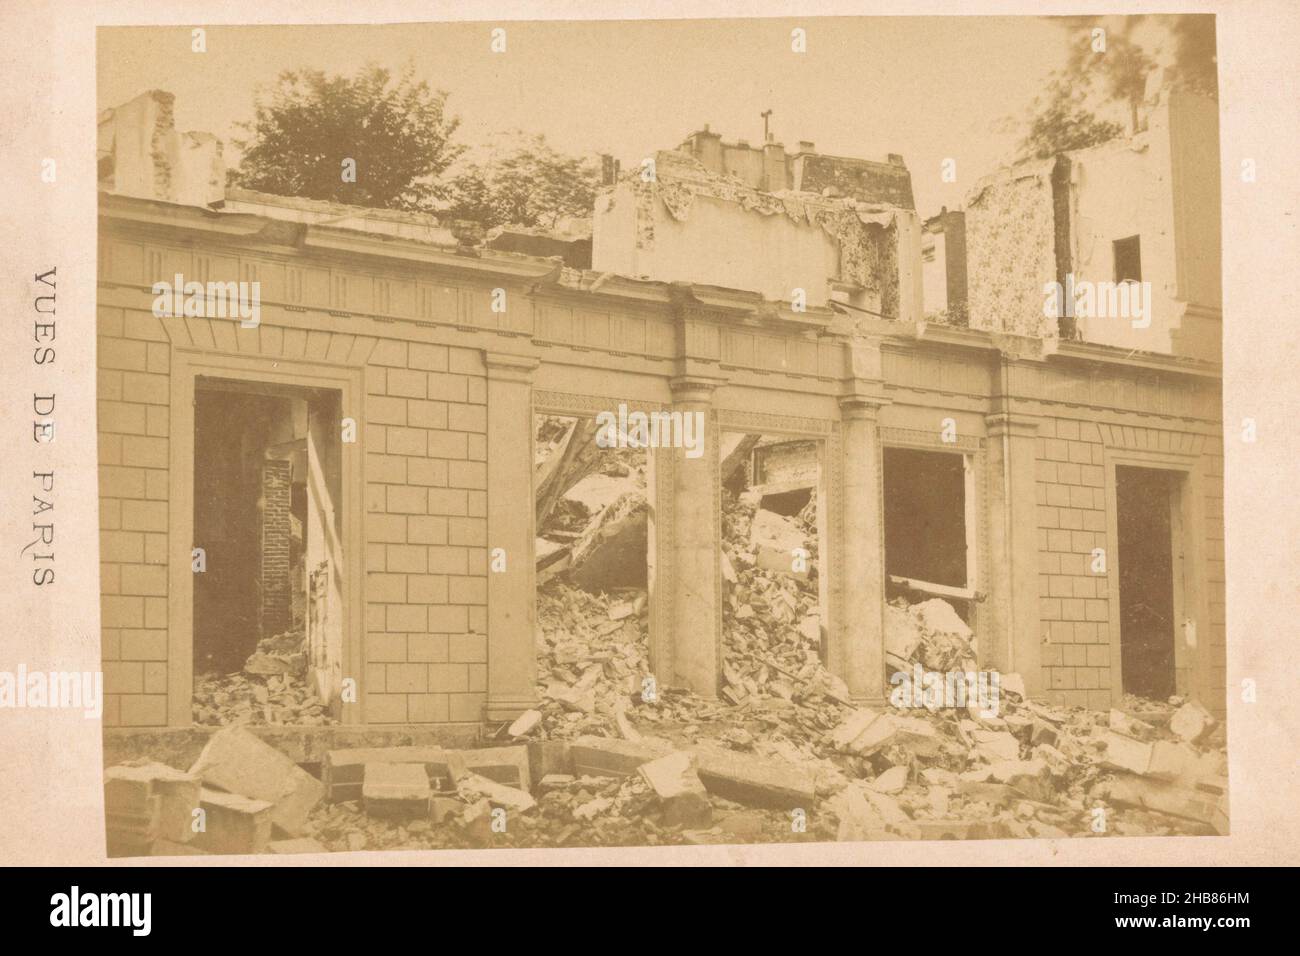 View of the destroyed house of President Thiers in Paris by the Paris Commune, Vues de Paris (series title on object), JR (mentioned on object), Paris, 28-May-1871 - in or before 1872, cardboard, albumen print, height 108 mm × width 165 mm Stock Photo